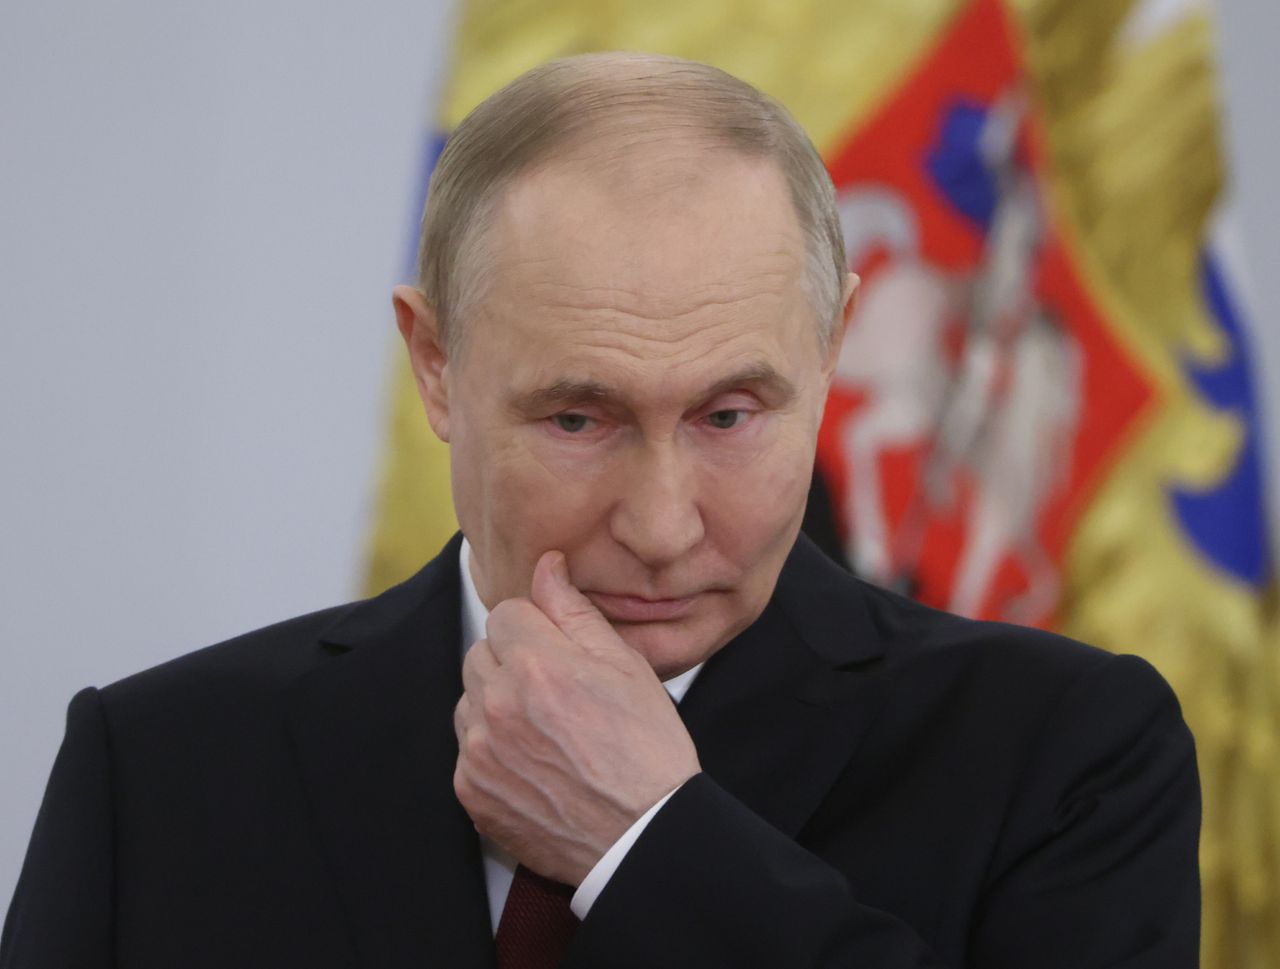 The United Kingdom struck Russia with sanctions over Vladimir Putin.